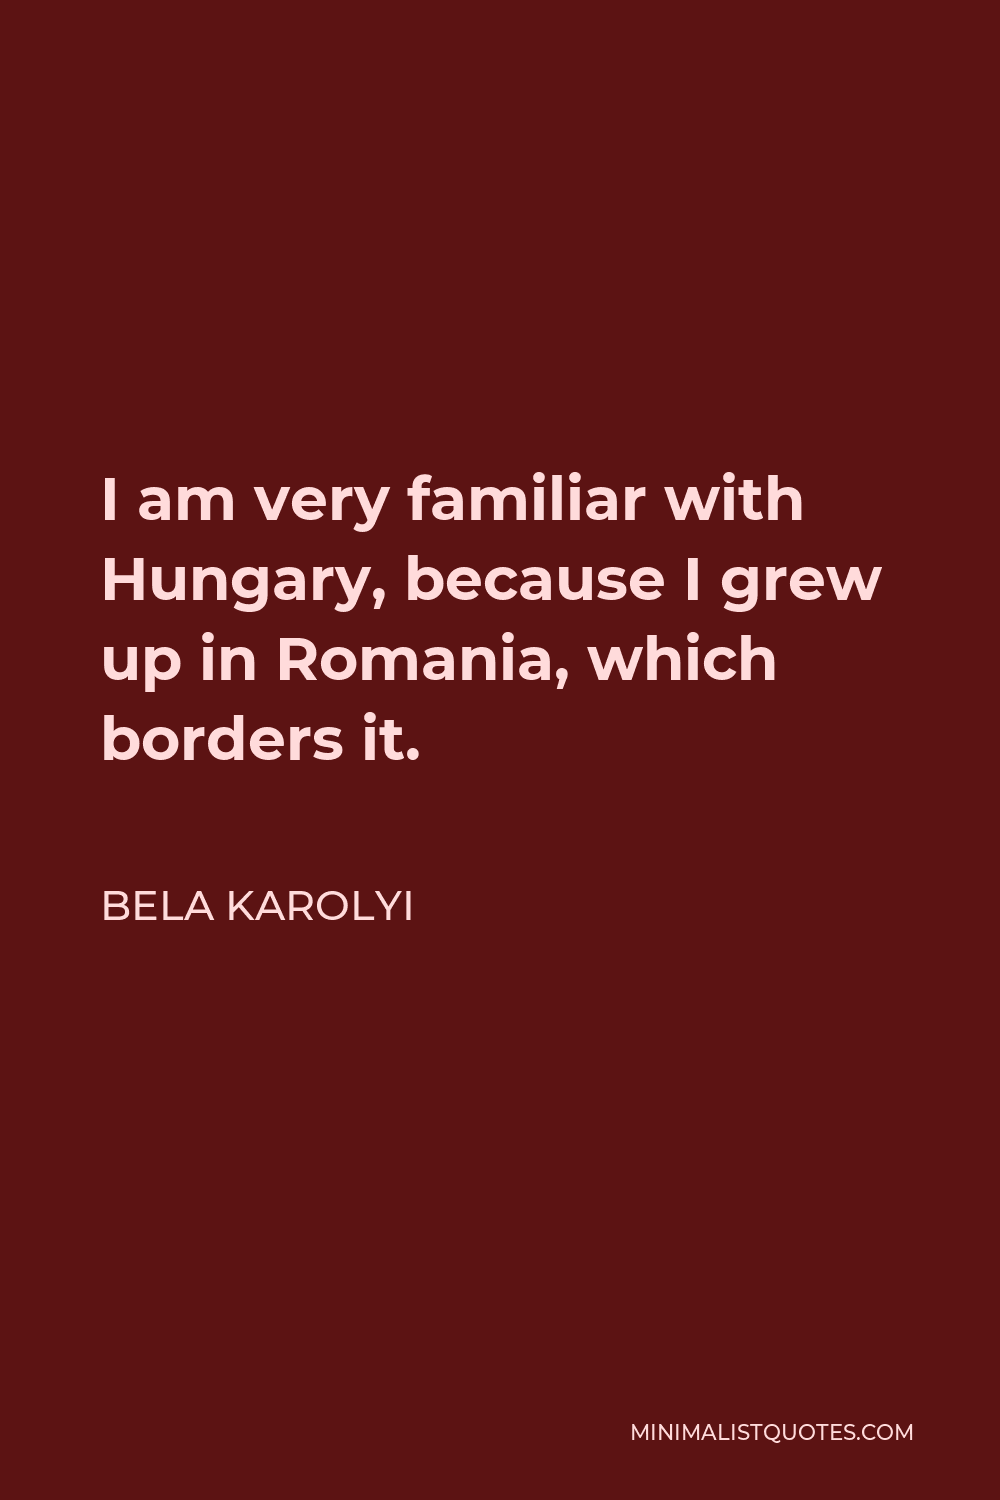 Bela Karolyi Quote - I am very familiar with Hungary, because I grew up in Romania, which borders it.